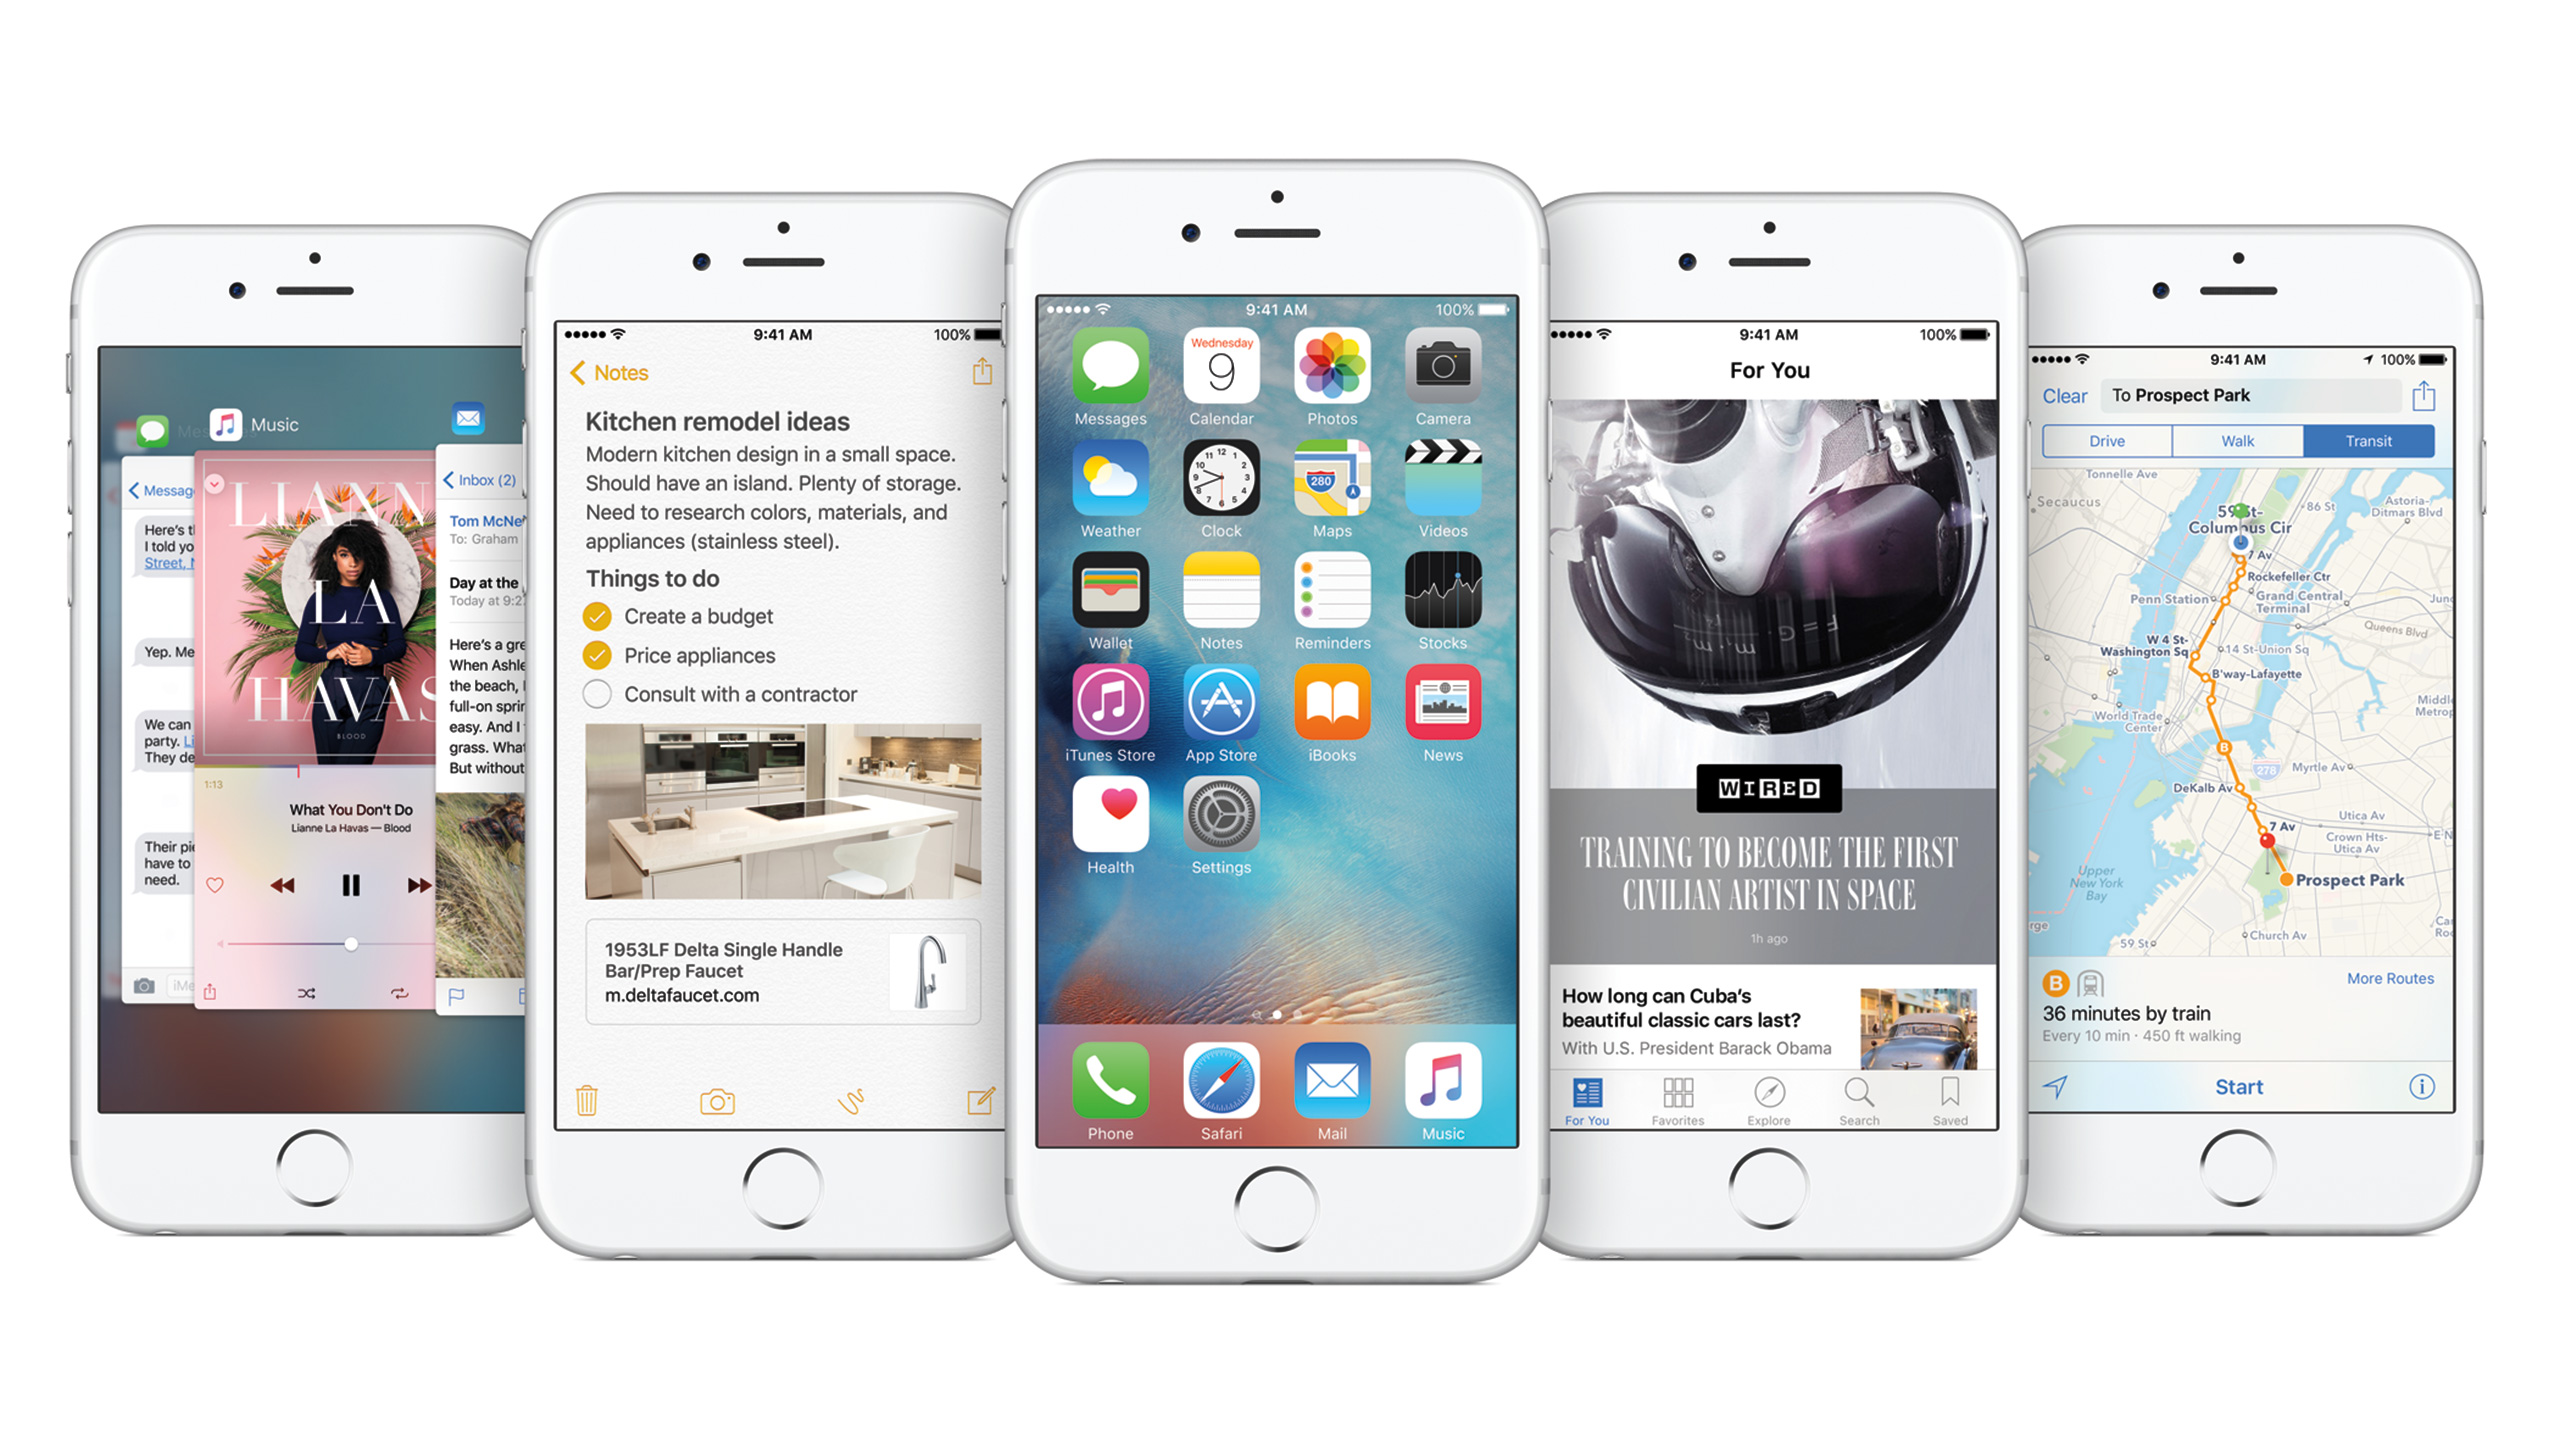 iOS 9 Will Be Released on September 16th